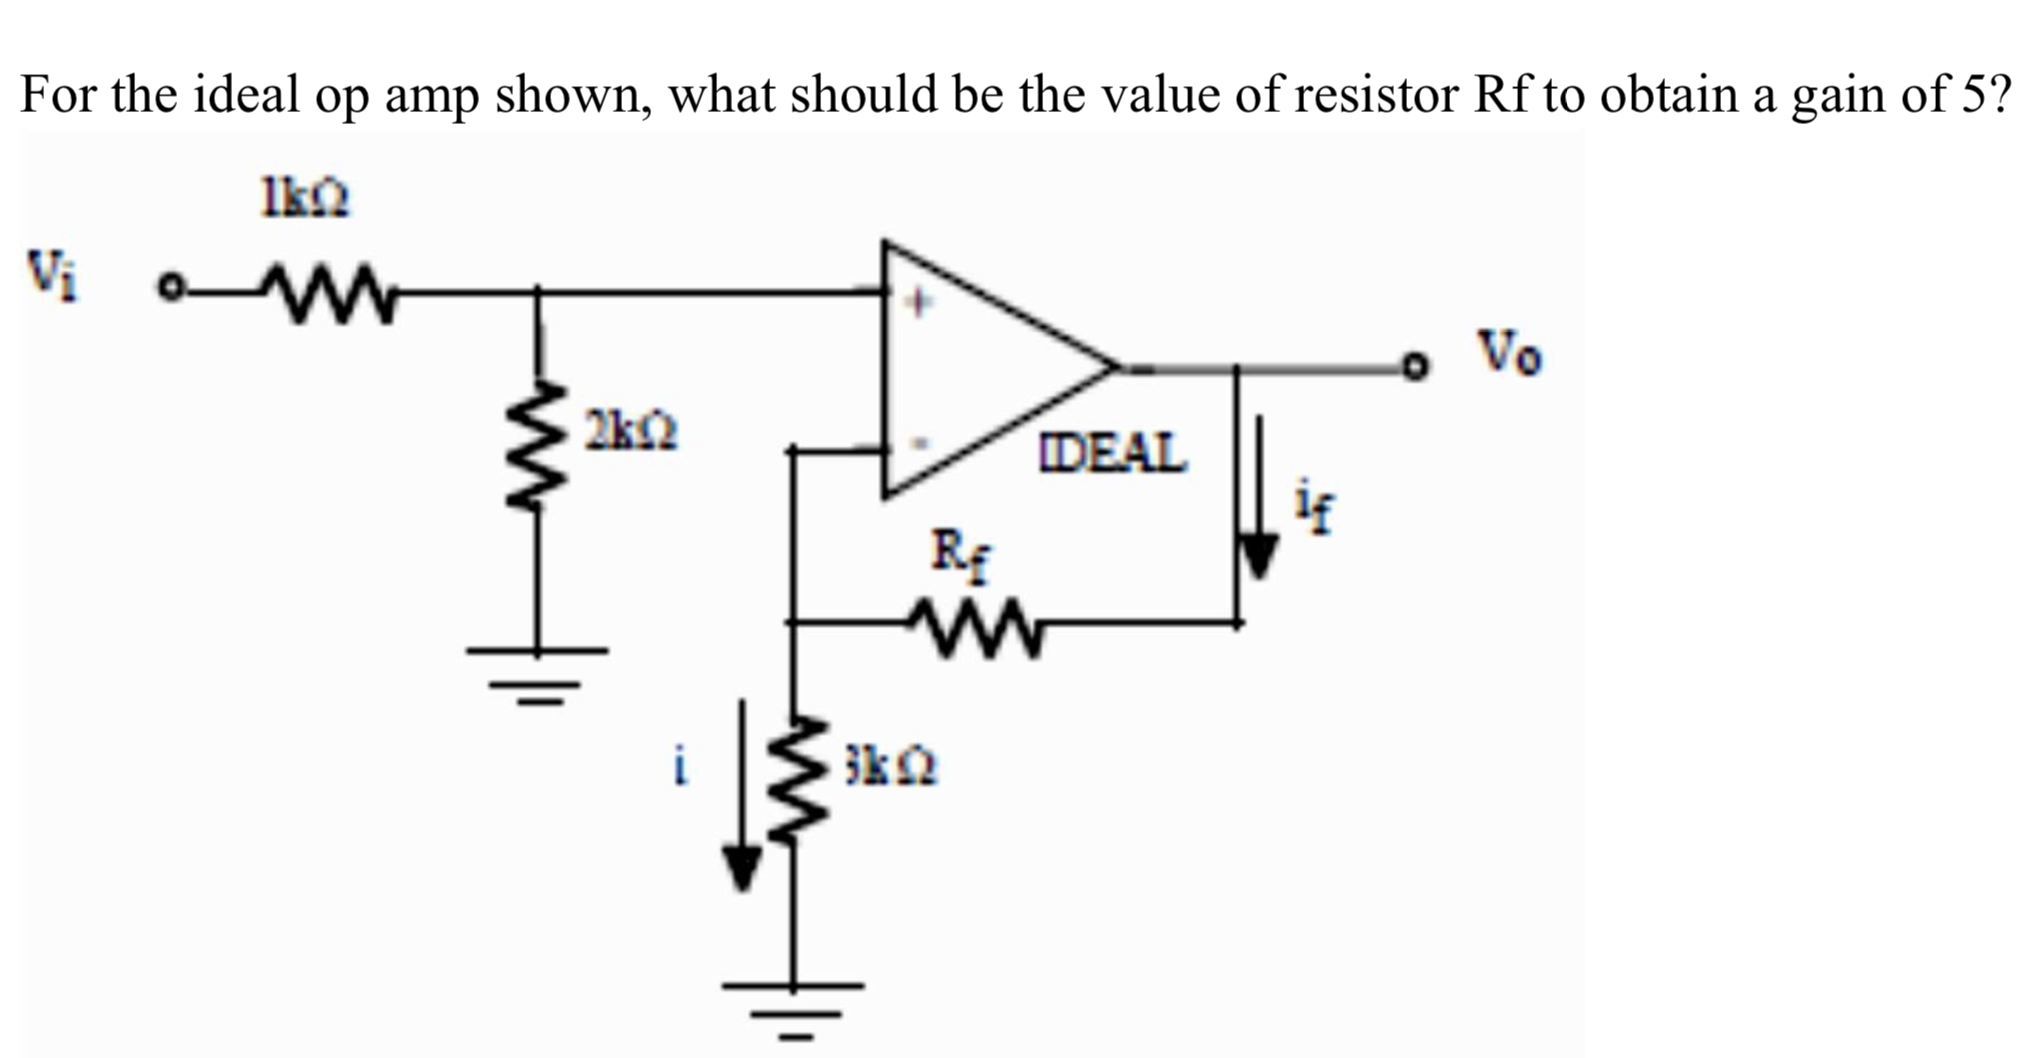 For the ideal op amp shown, what should be the value of resistor Rf to obtain a gain of 5?
Ik
Vo
DEAL
ig
2k2
RE
3kQ
